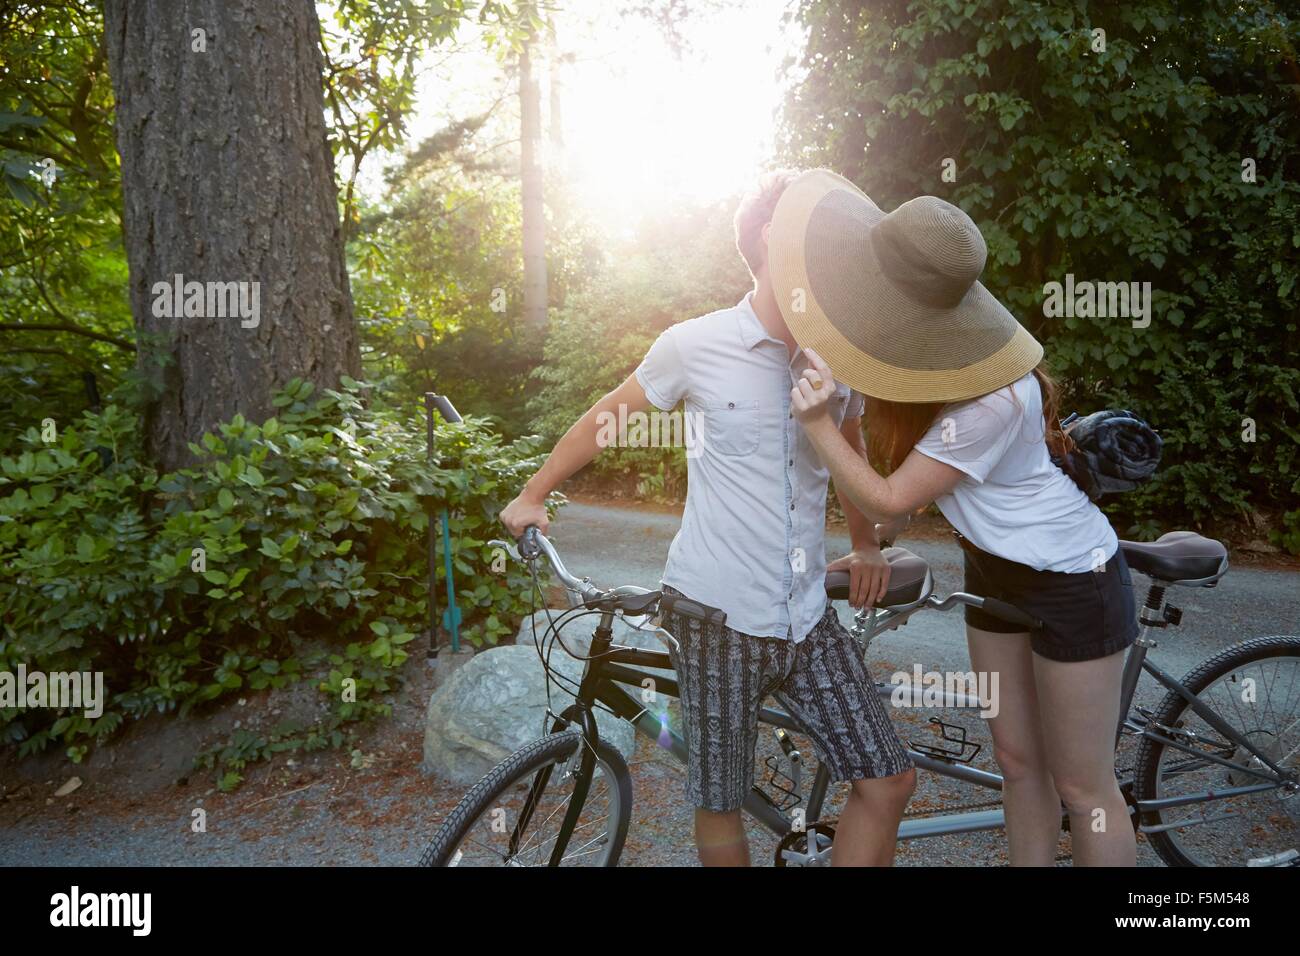 Young couple with tandem cycle kissing on rural road Stock Photo